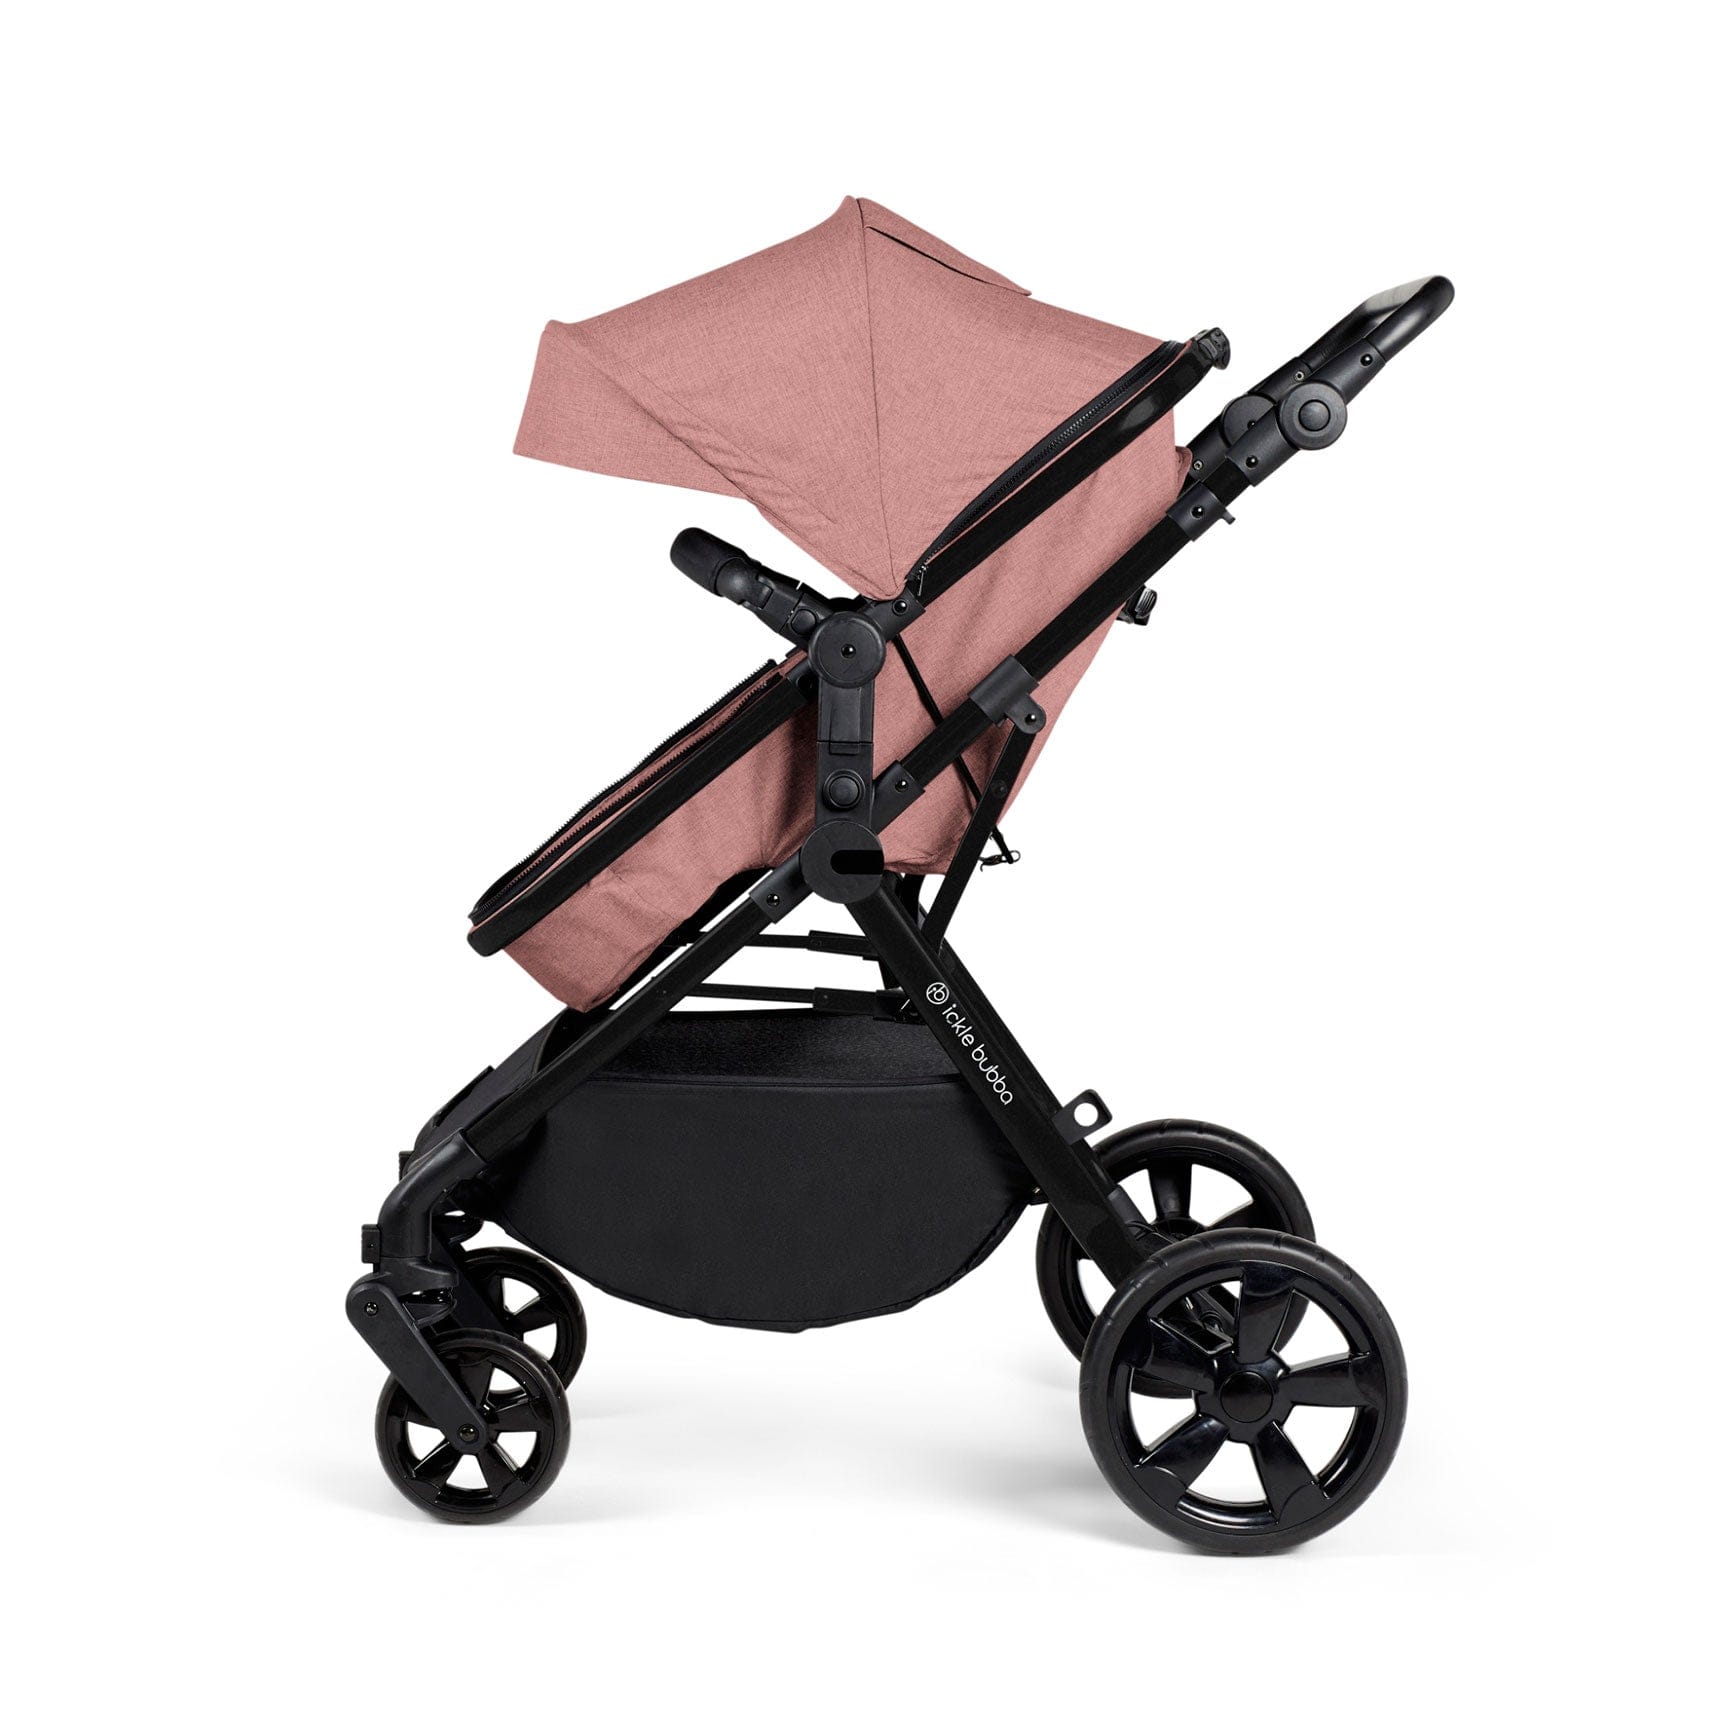 Ickle Bubba Comet 3-in-1 Travel System with Astral Car Seat in Dusty Pink Baby Prams 10-008-101-134 5056515025774